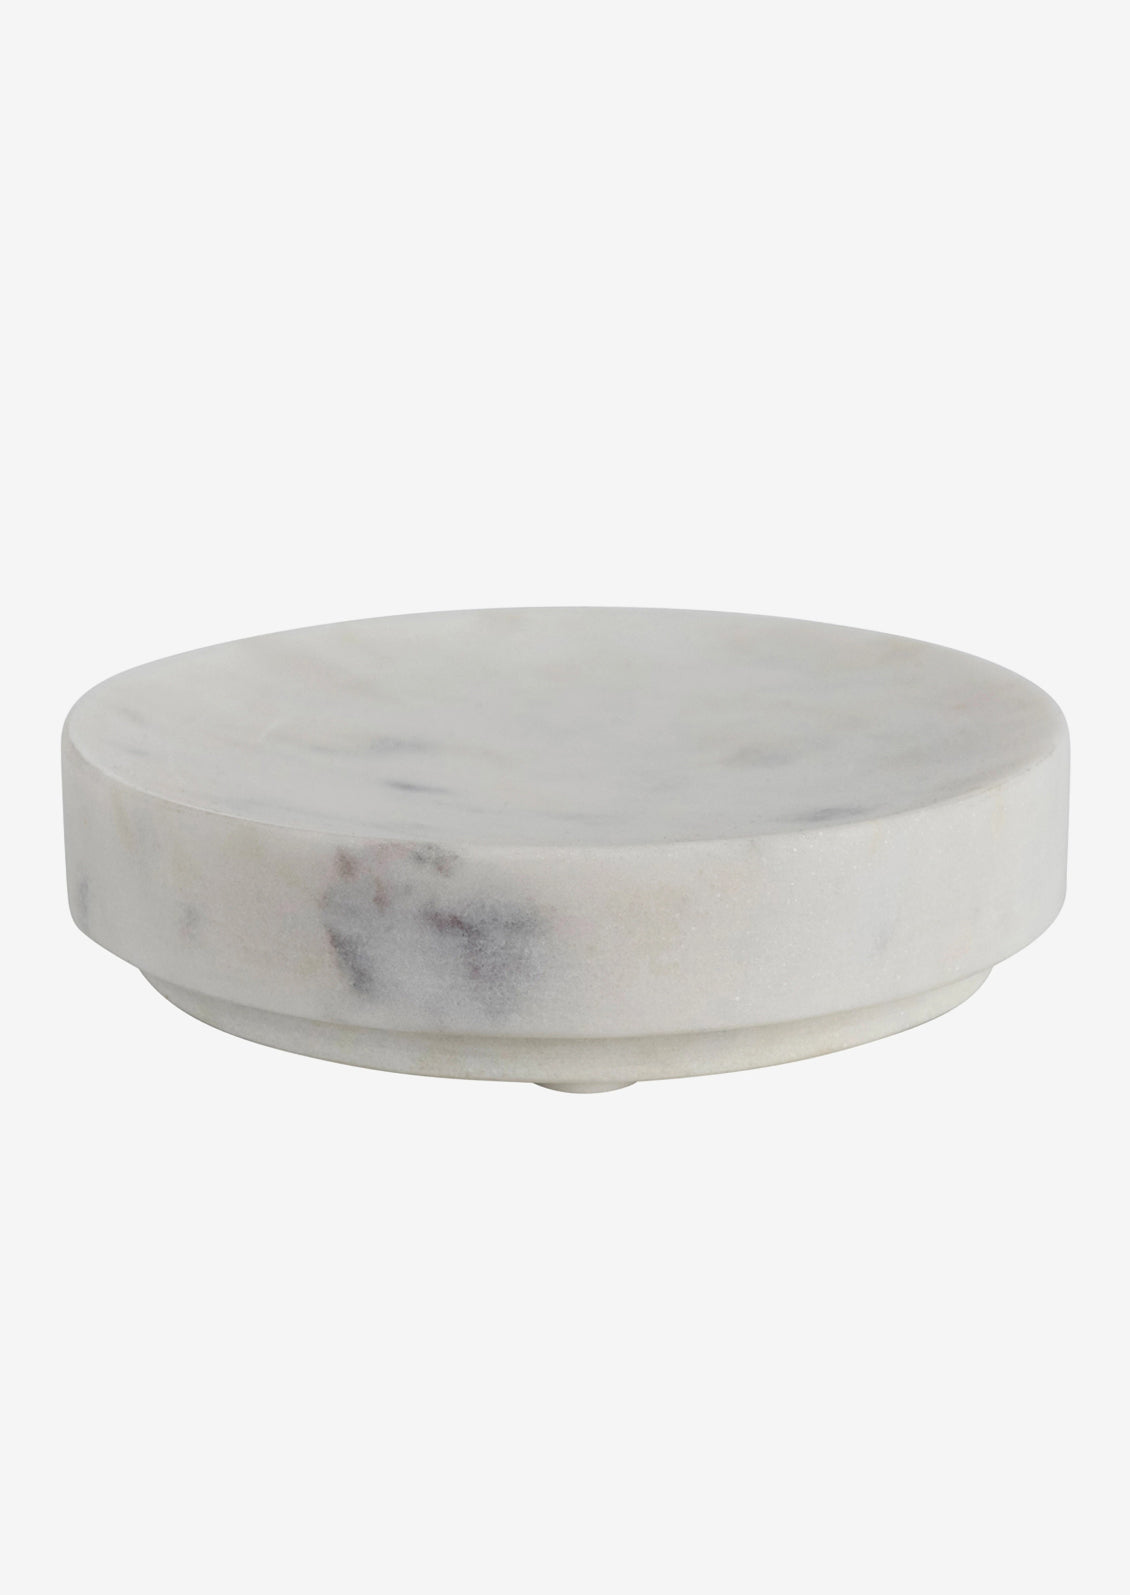 A round soap dish in white marble.